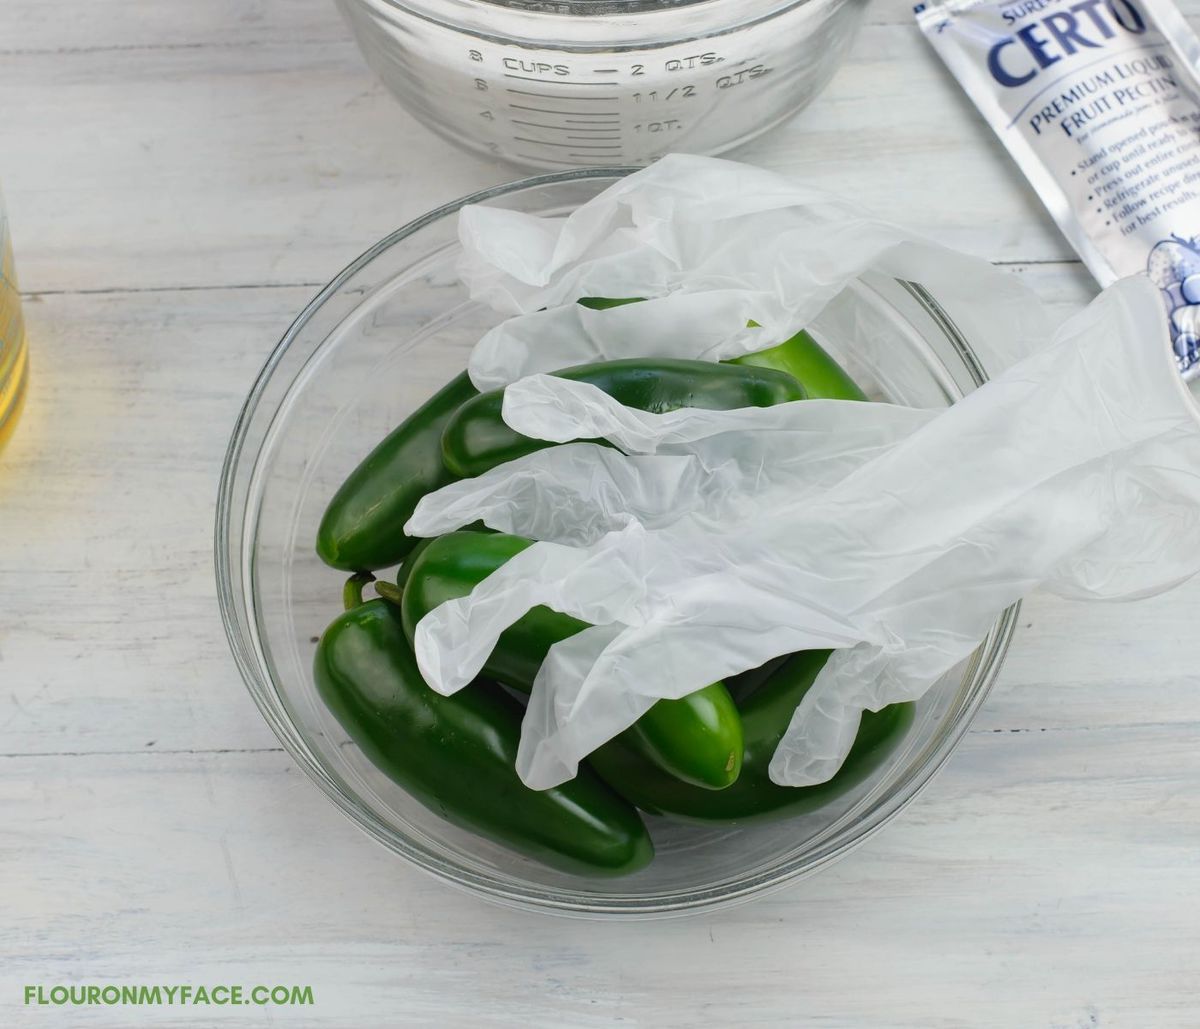 Jalapeno peppers in a bowl with a pair of plastic gloves for protection.